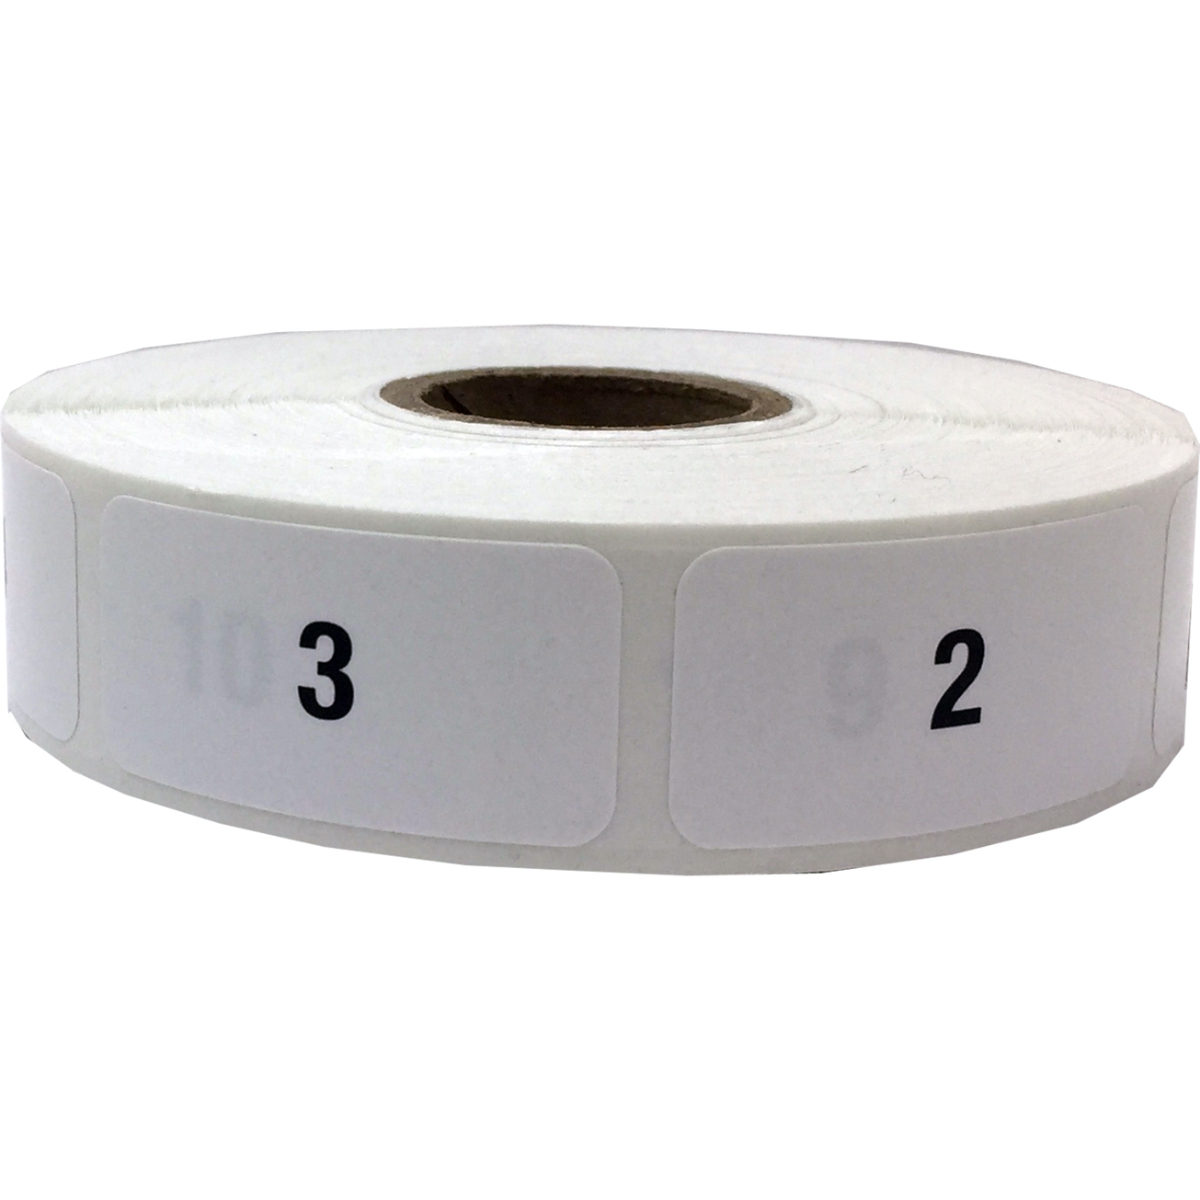 1-10 (50 times) Consecutive Number Labels 1 Round Yellow and